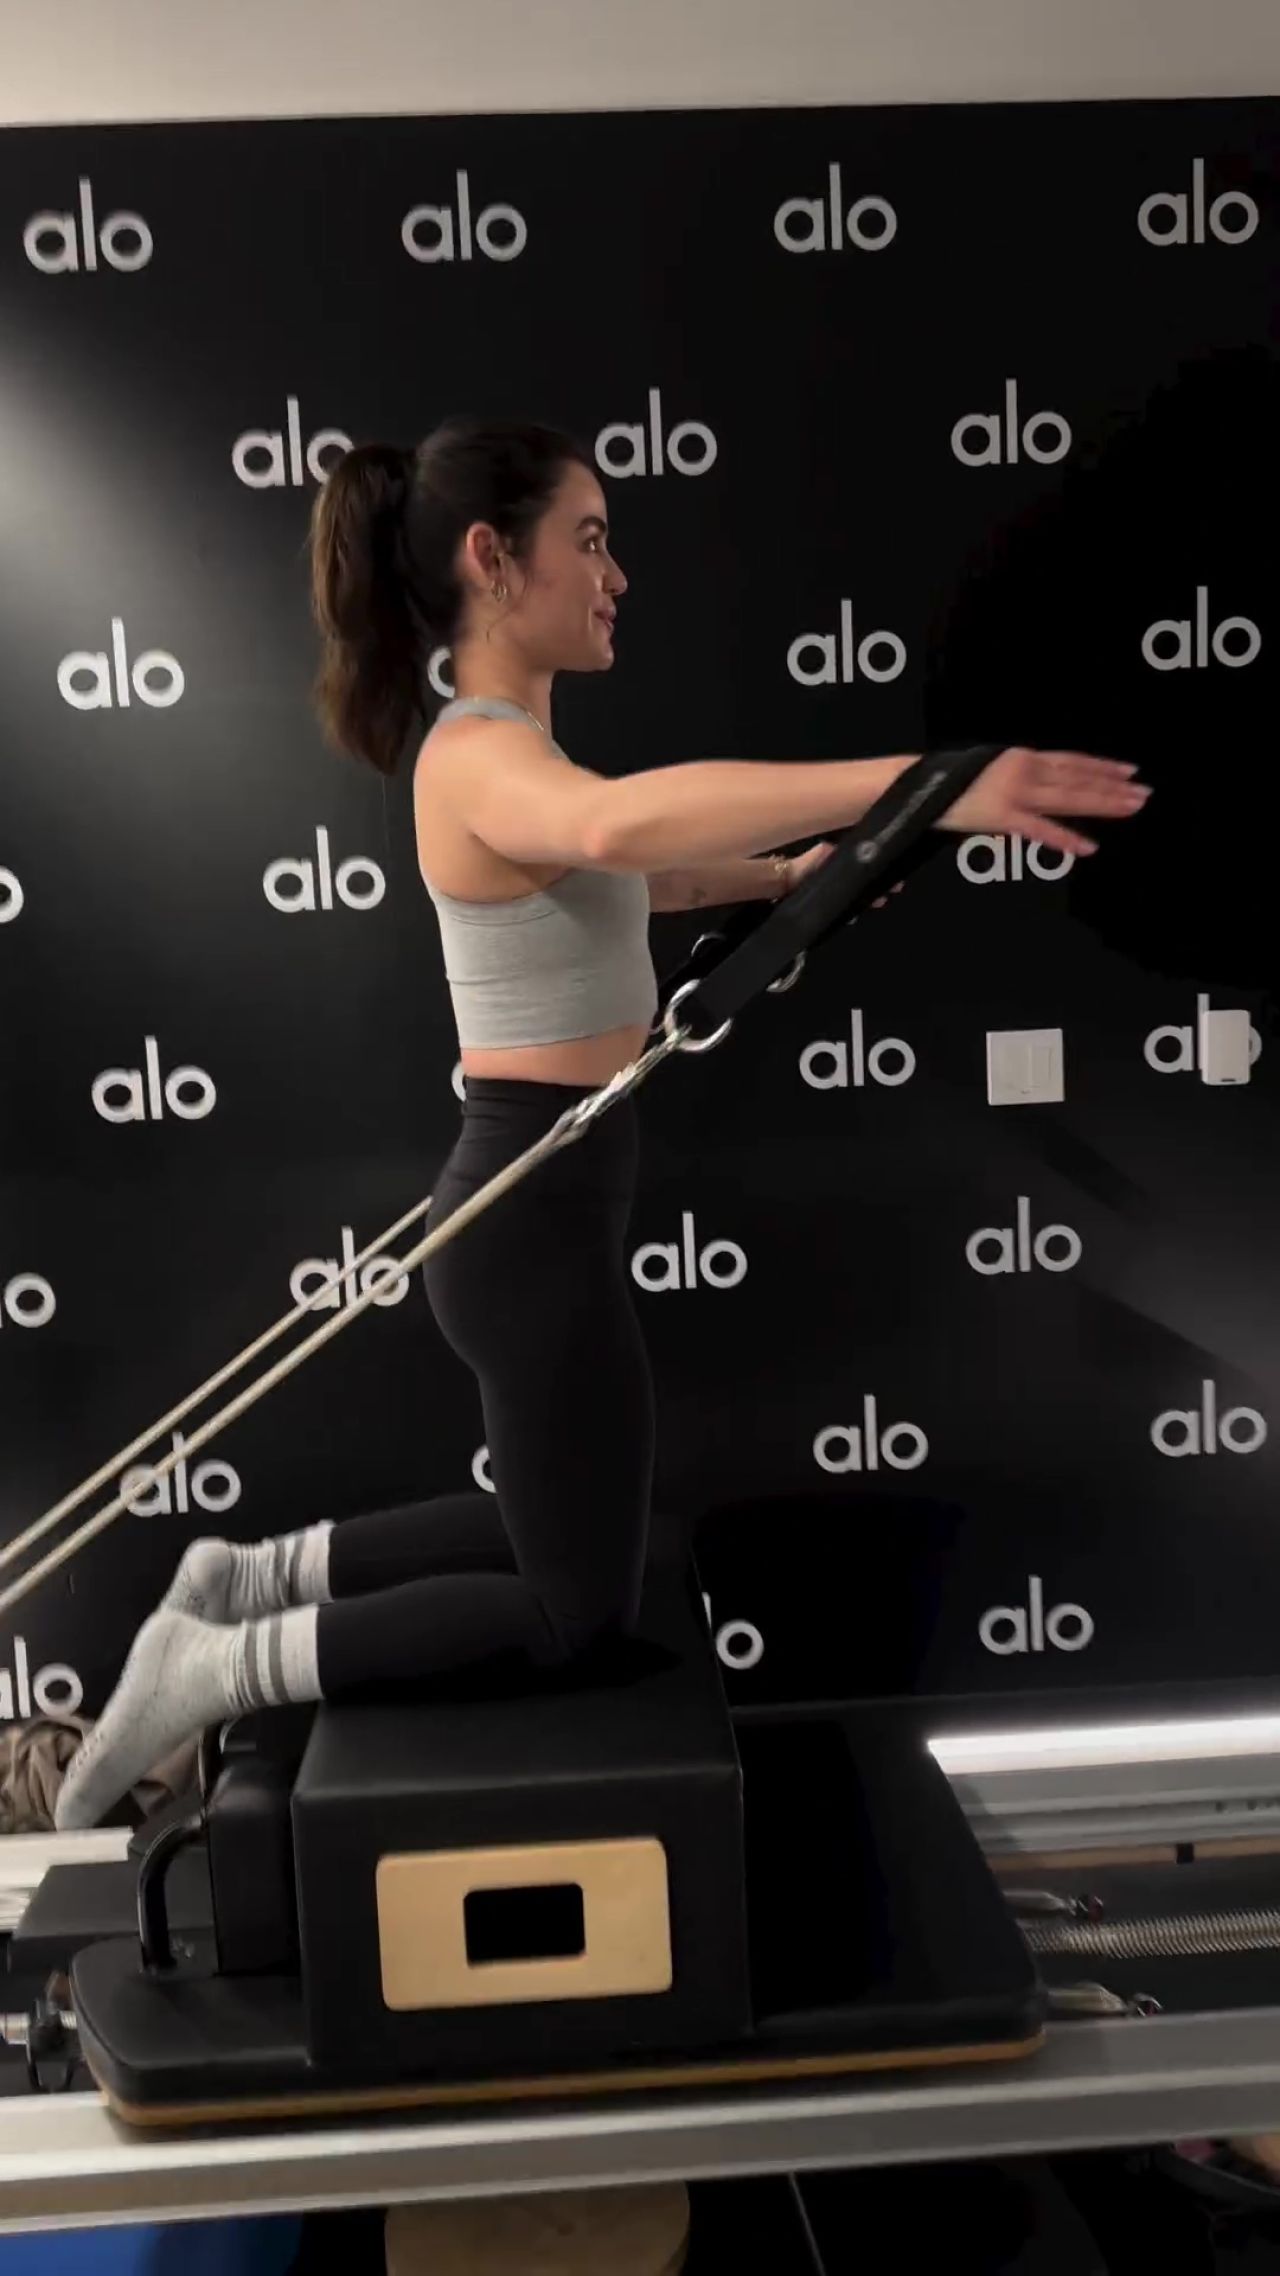 AMERICAN ACTRESS LUCY HALE WORKING OUT GYM STILLS03